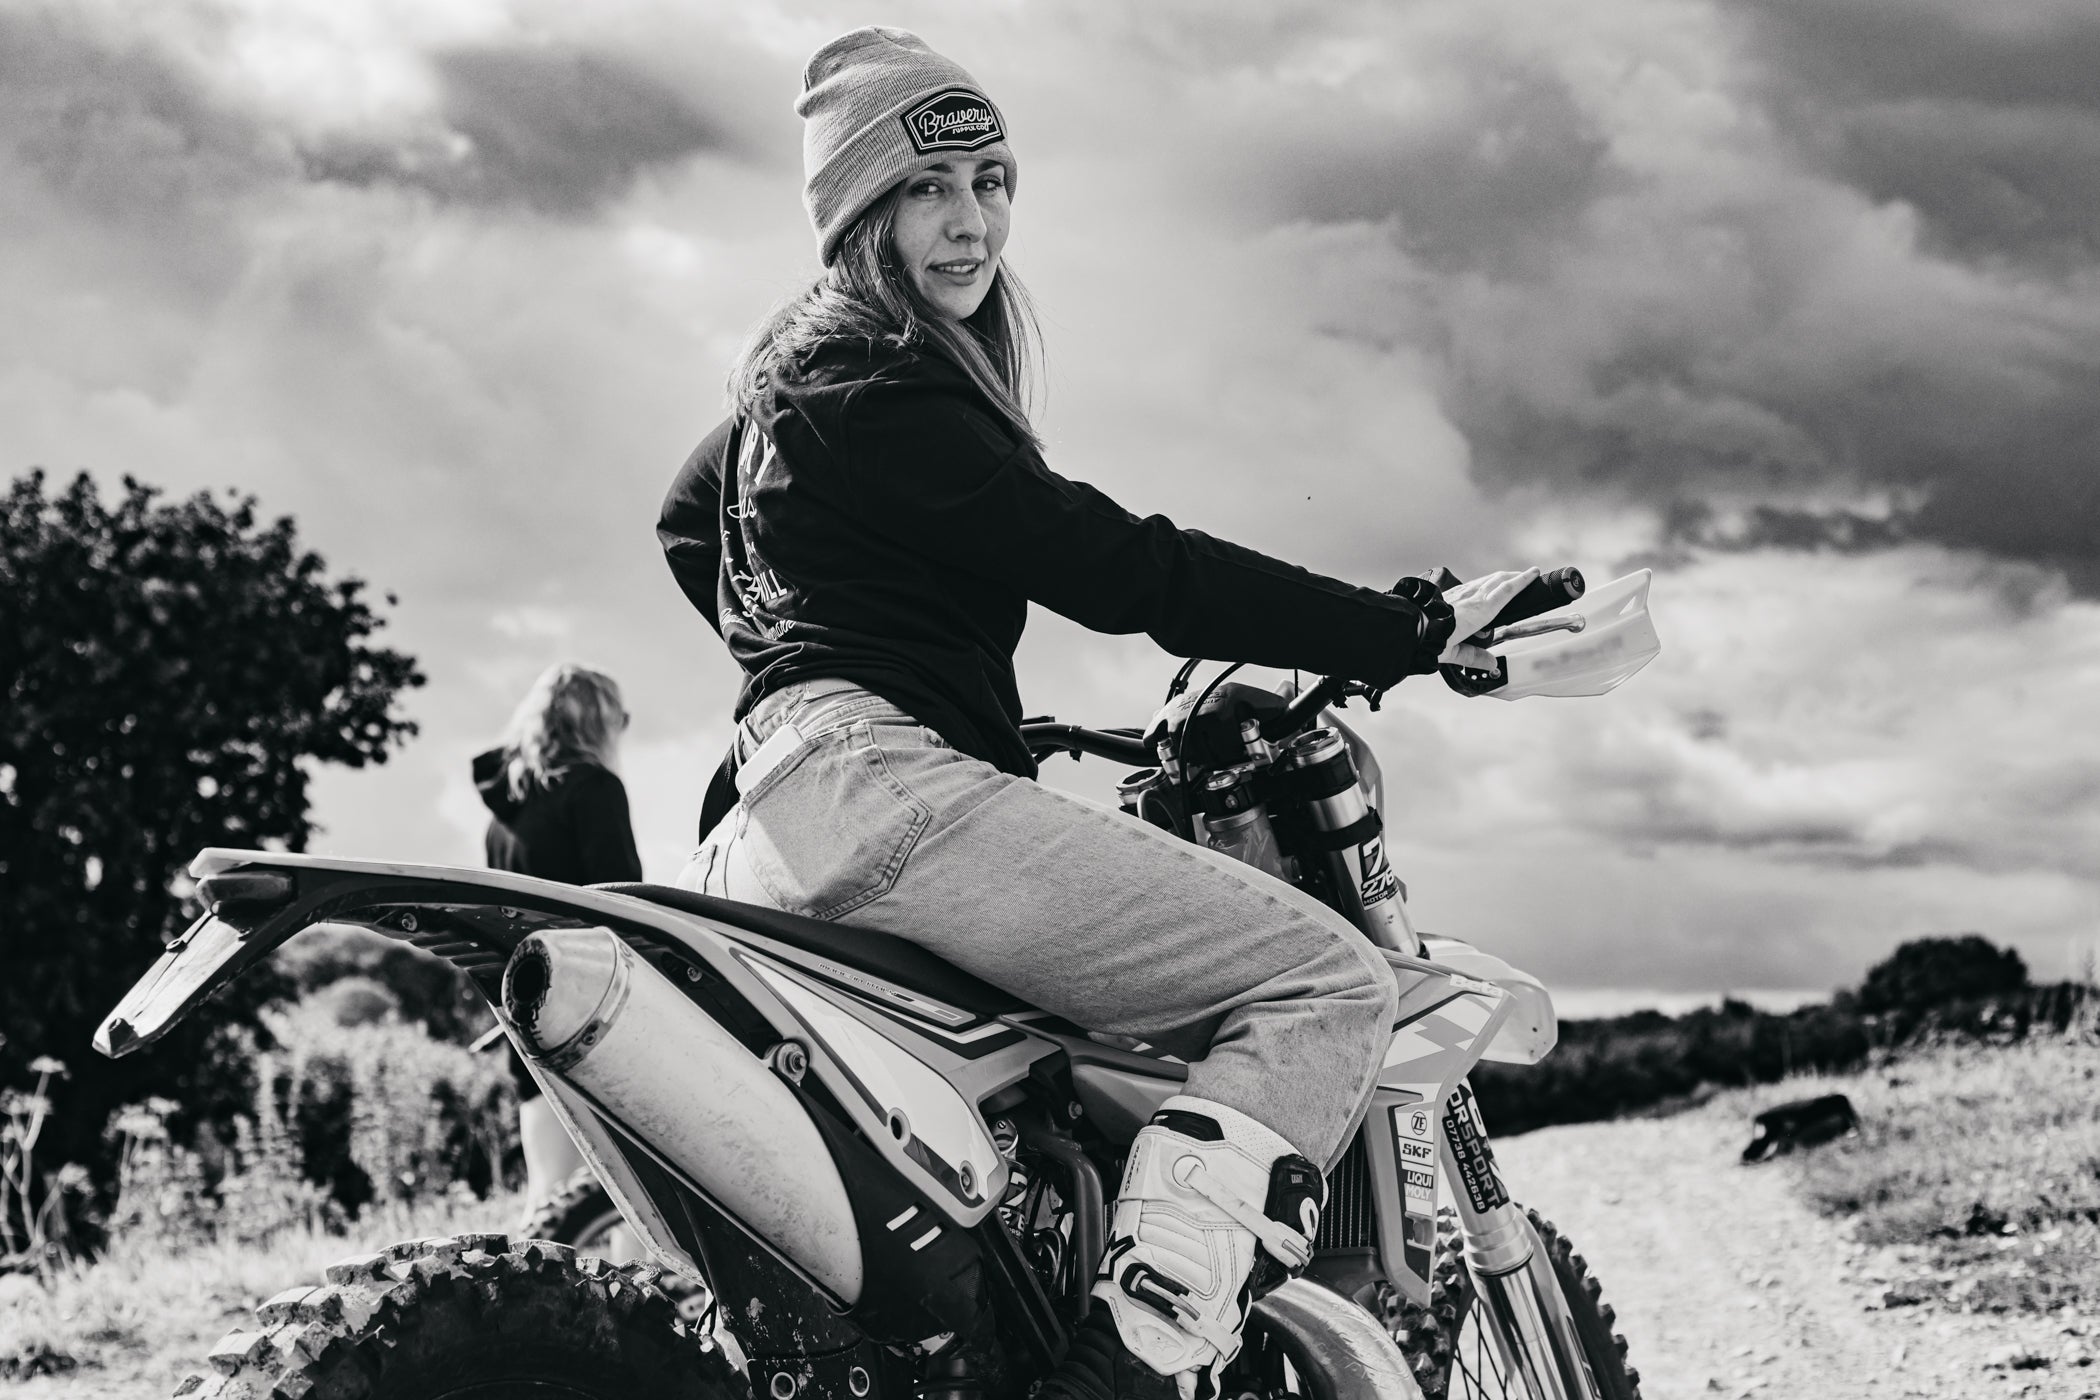 Empowering Women: Dominating the Trails - Female Enduro Riding in the UK